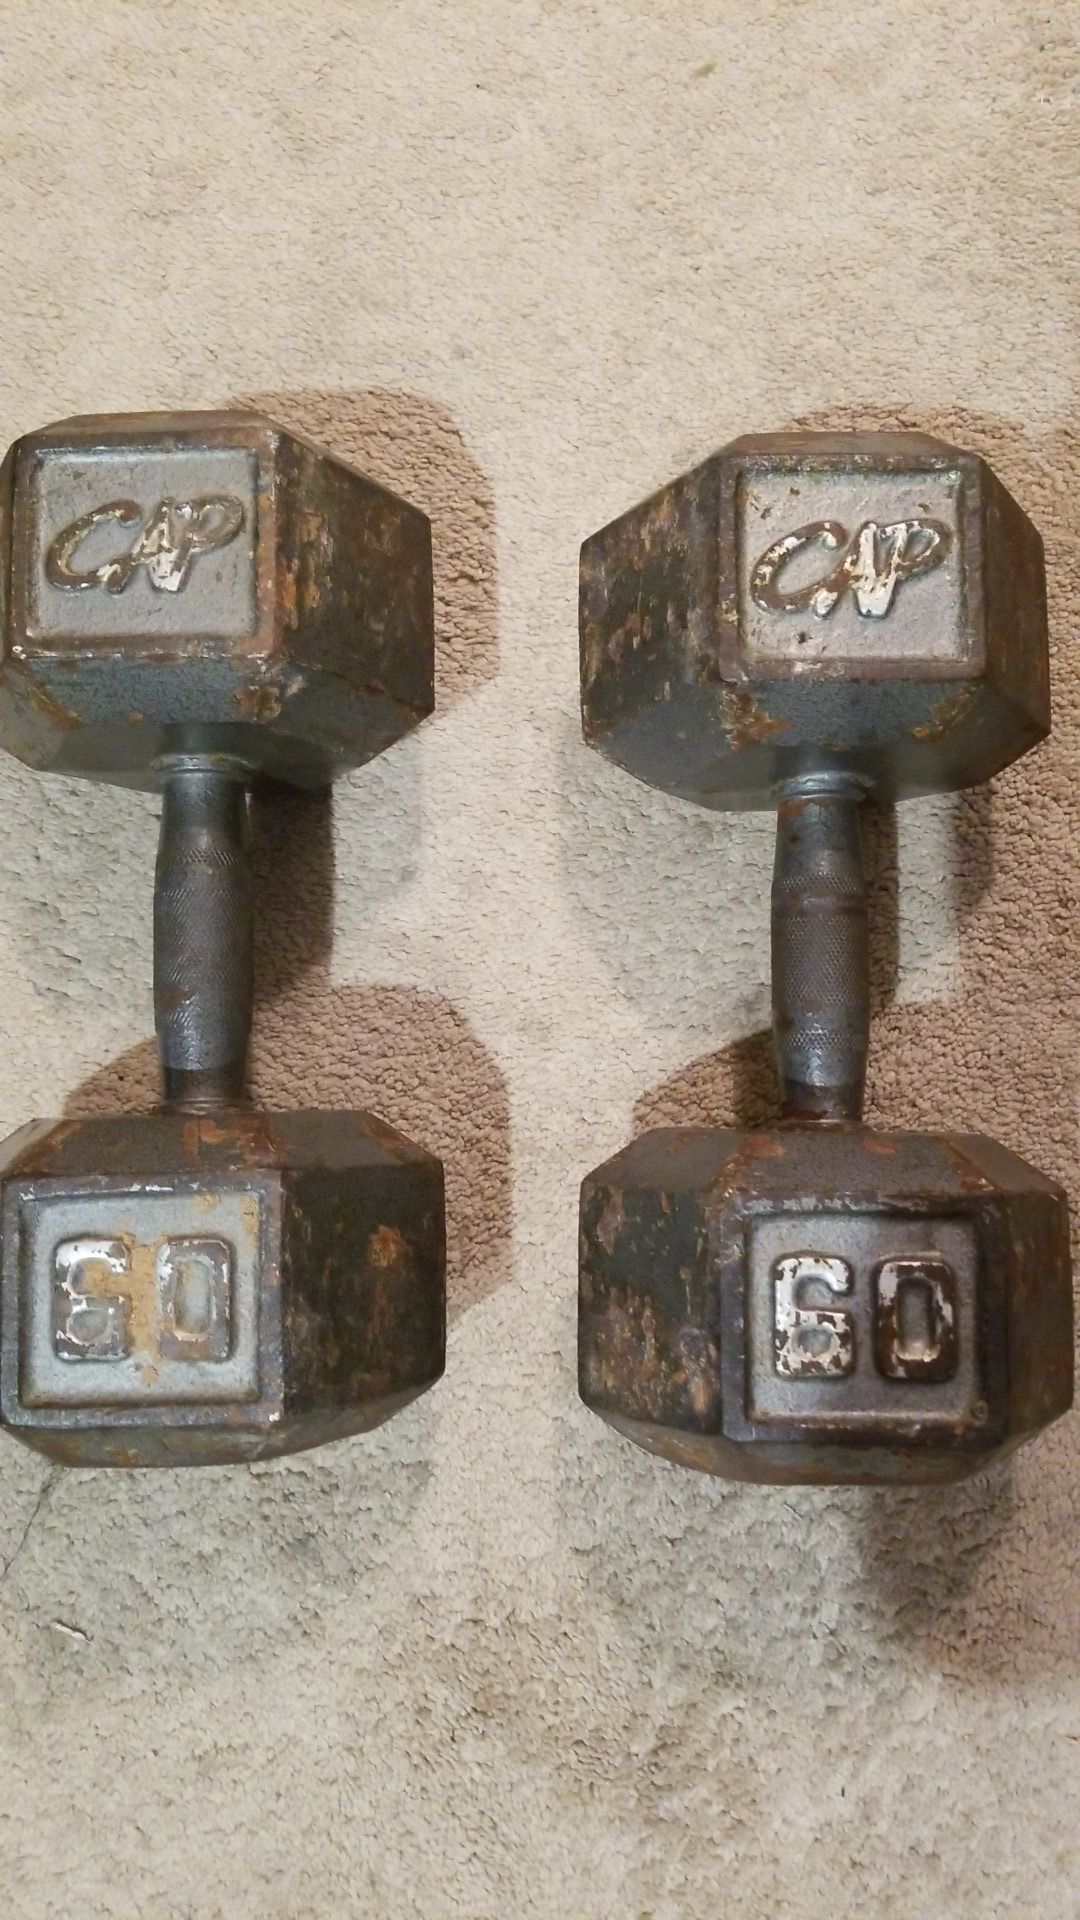 Two 60 pound dumbbells